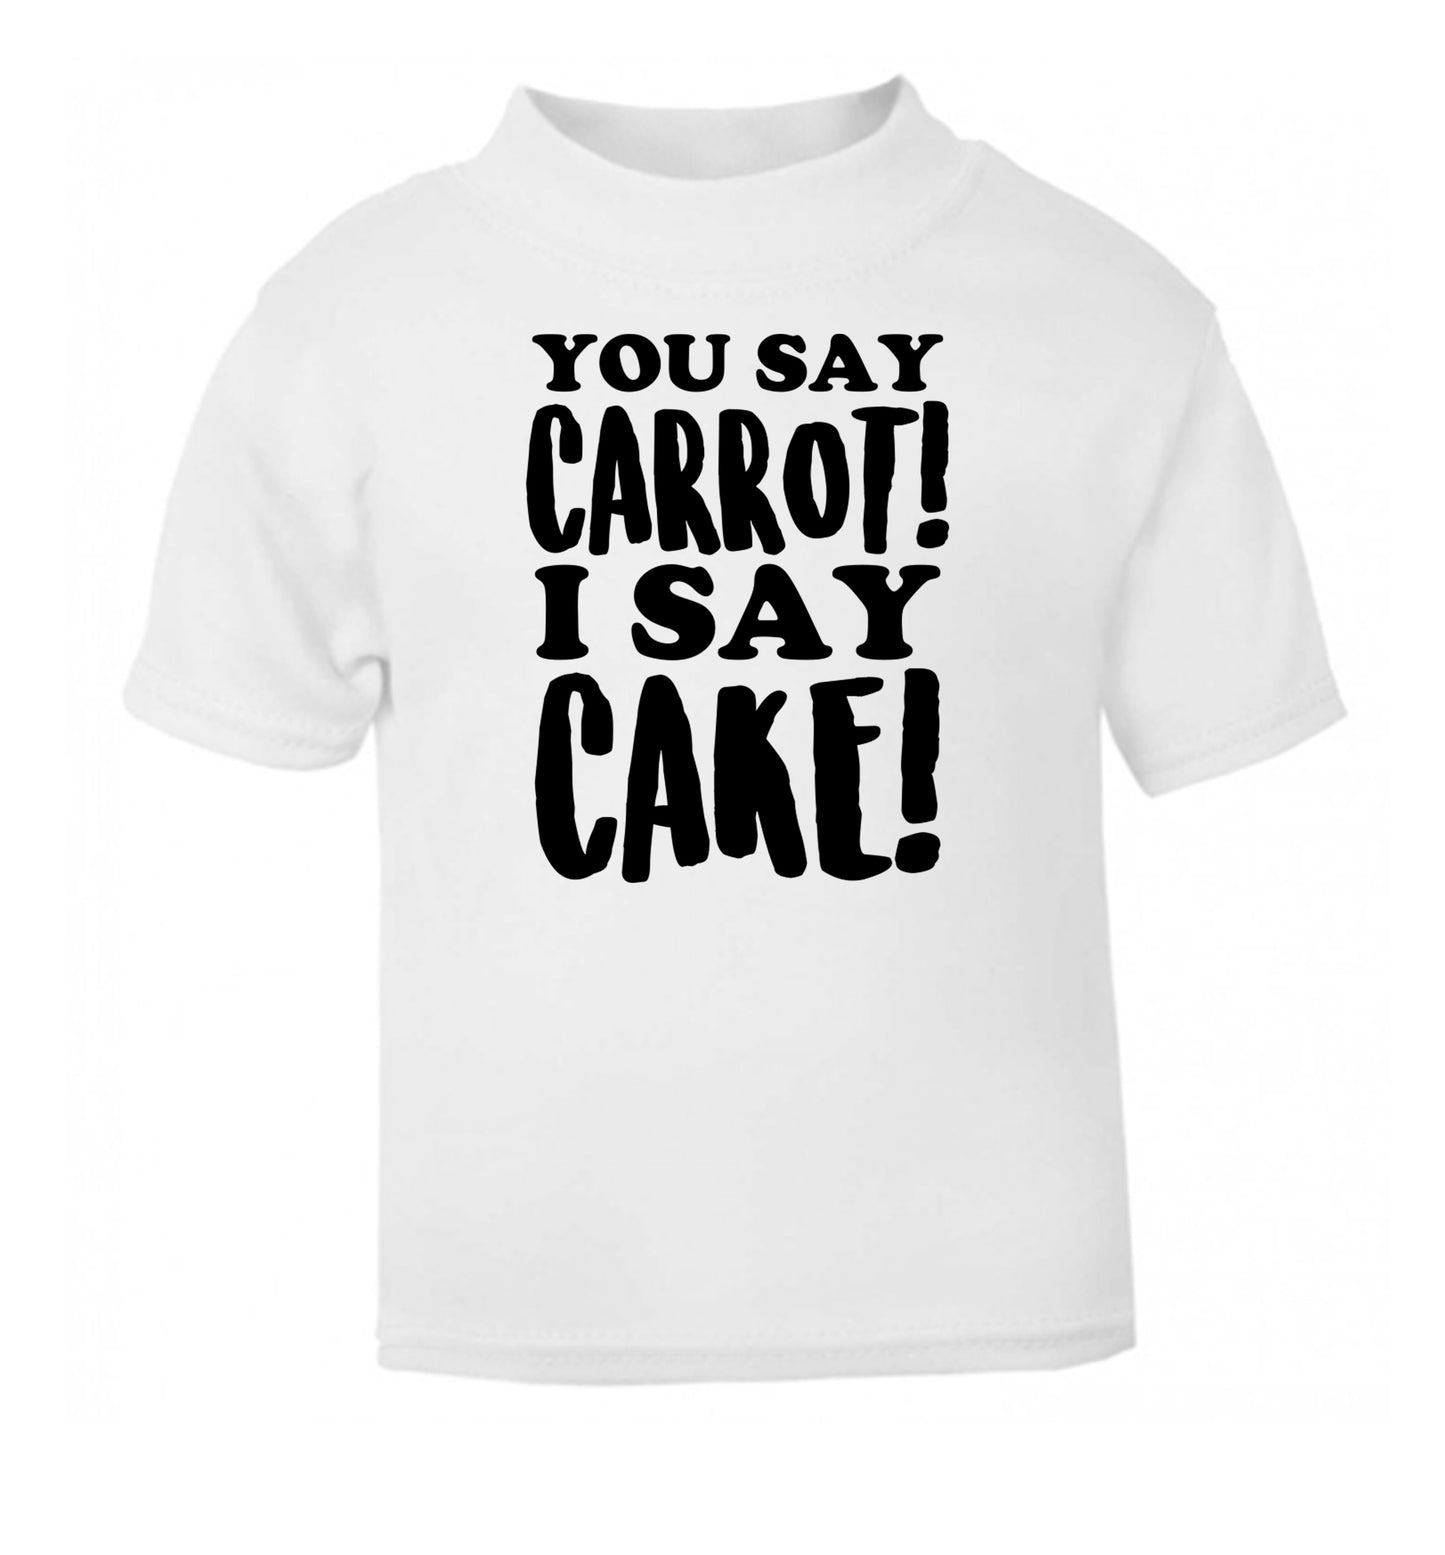 You say carrot I say cake! white Baby Toddler Tshirt 2 Years